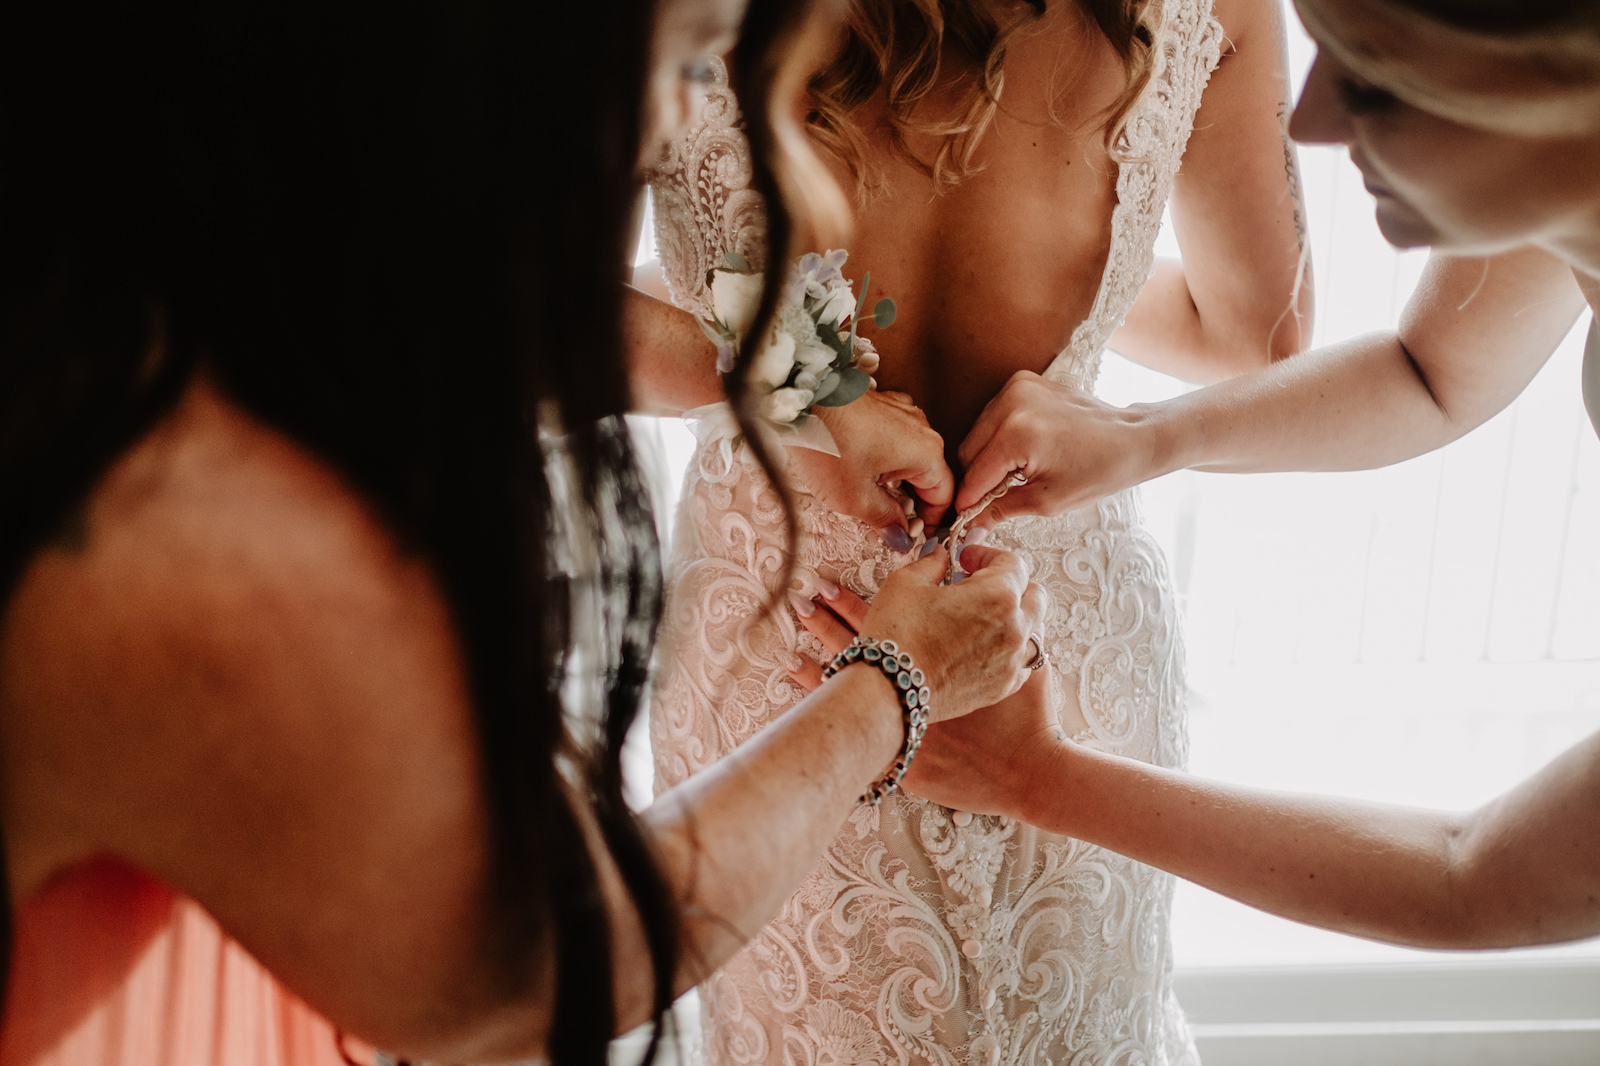 Bridesmaids Helping Bride Get Ready Shot | Allure Bridals Lace Low Back Bridal Gown Wedding Dress